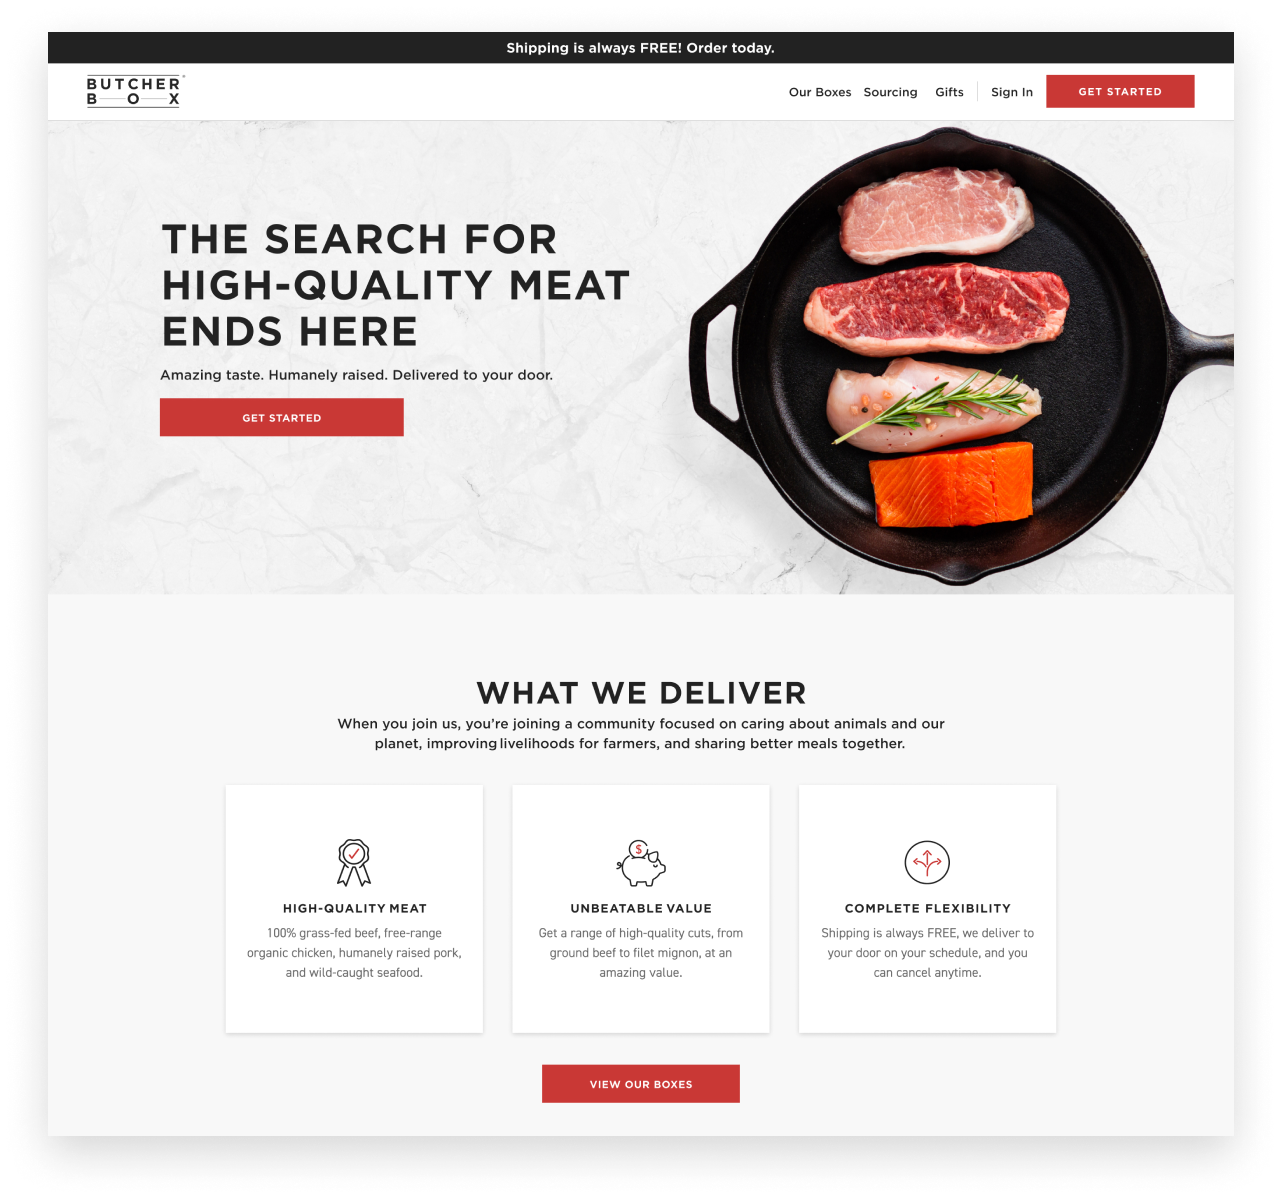 ButcherBox homepage design expressing value proposition and customer benefits